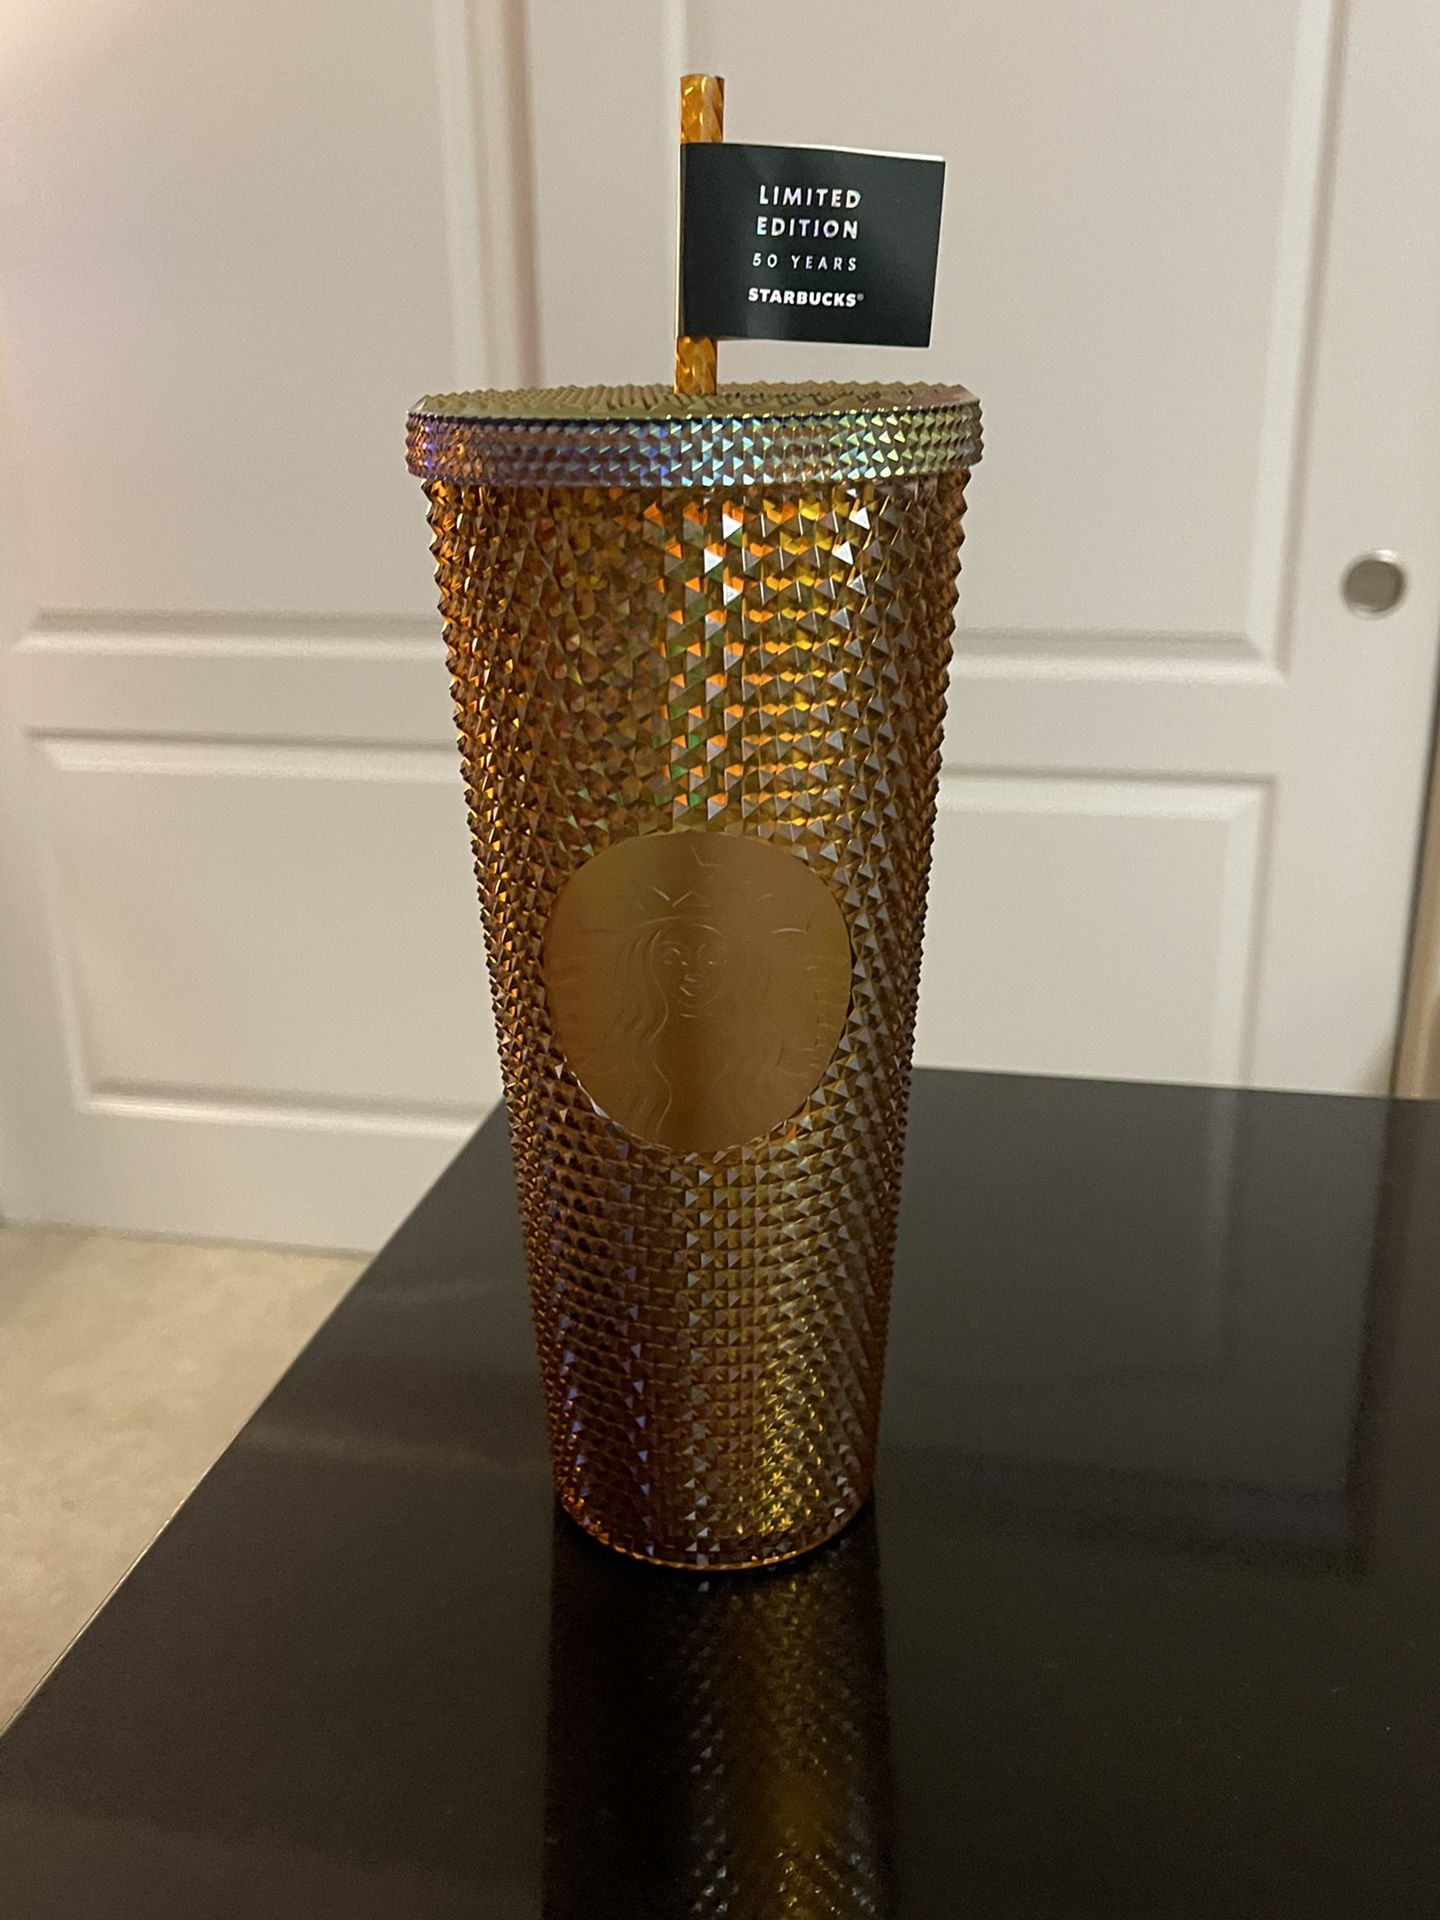 Starbucks Limited Edition Cup